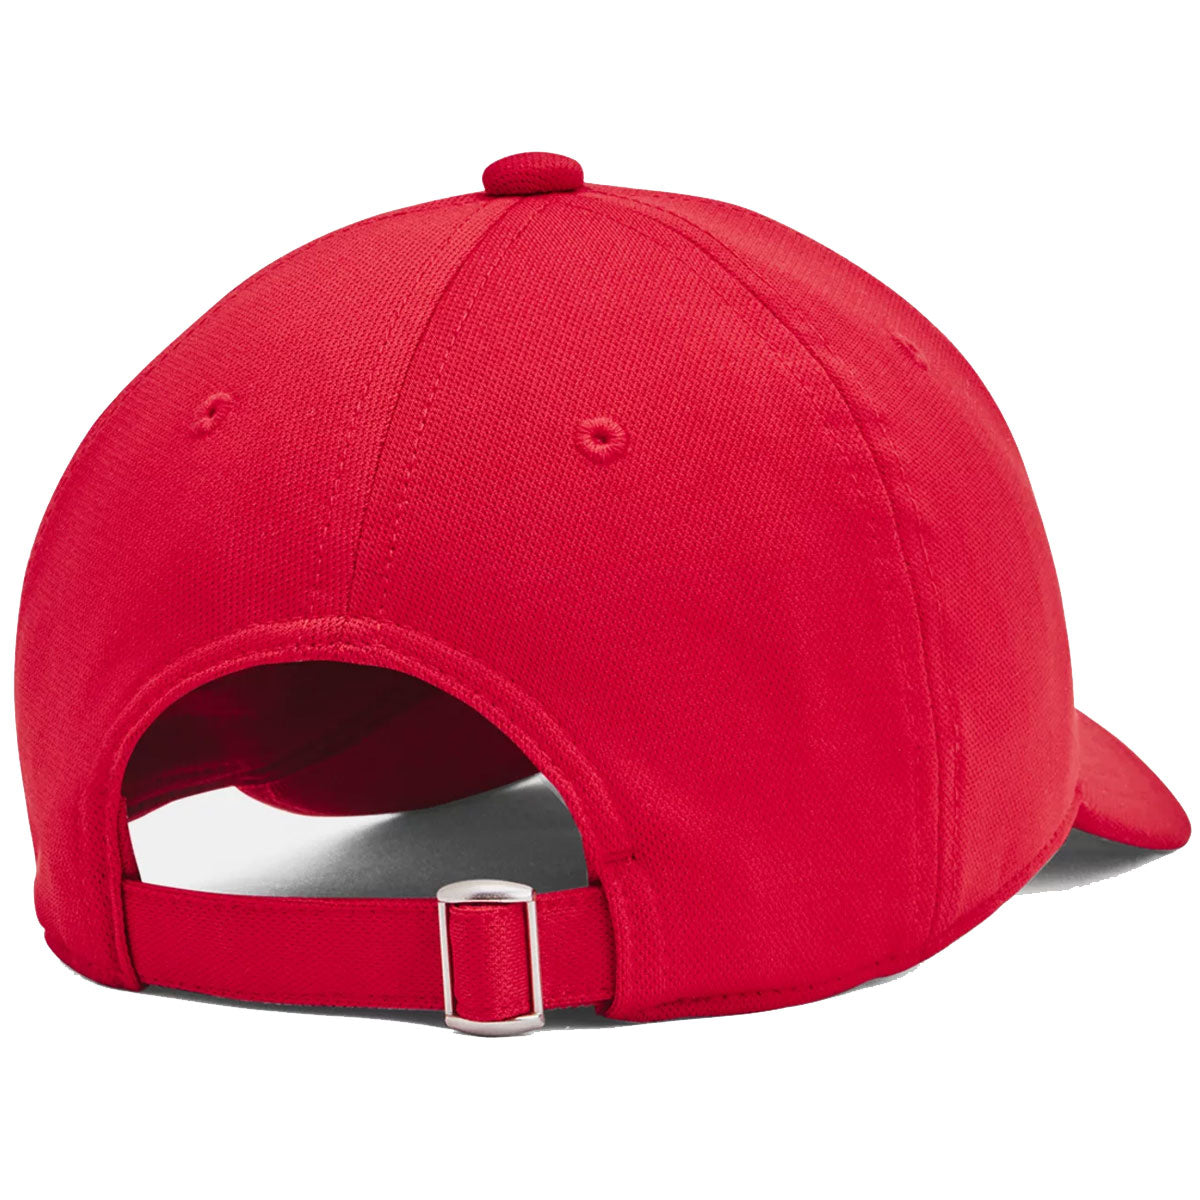 Under Armour Adjustable Blitzing Cap - Youth - Red/White